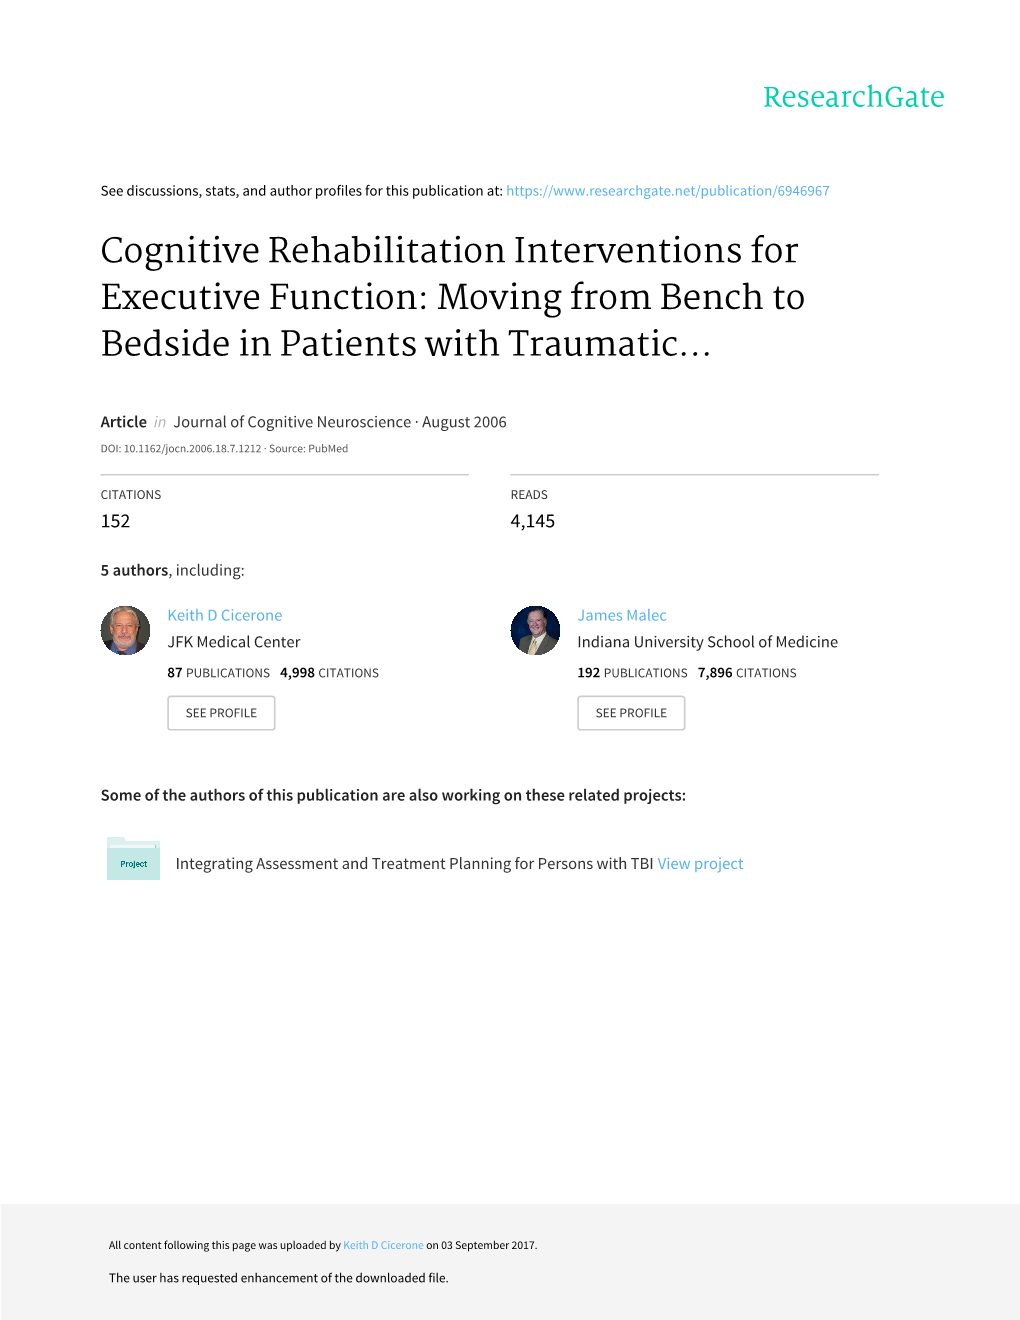 Cognitive Rehabilitation Interventions for Executive Function: Moving from Bench to Bedside in Patients with Traumatic